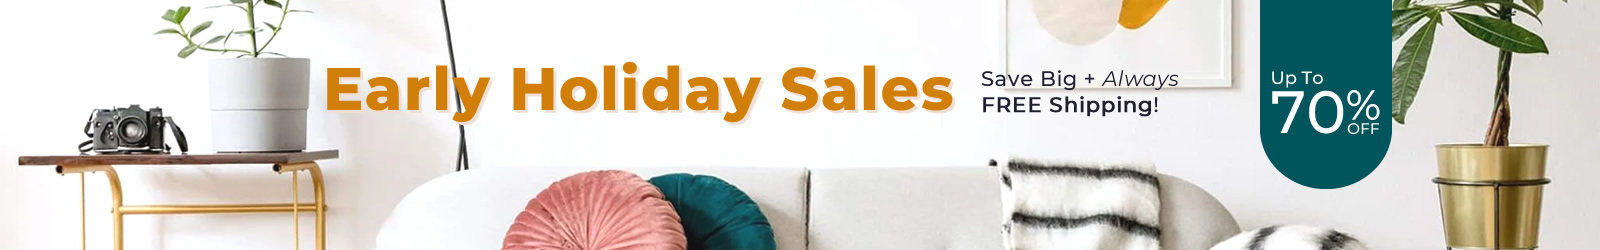 Early Holiday Sale Banner